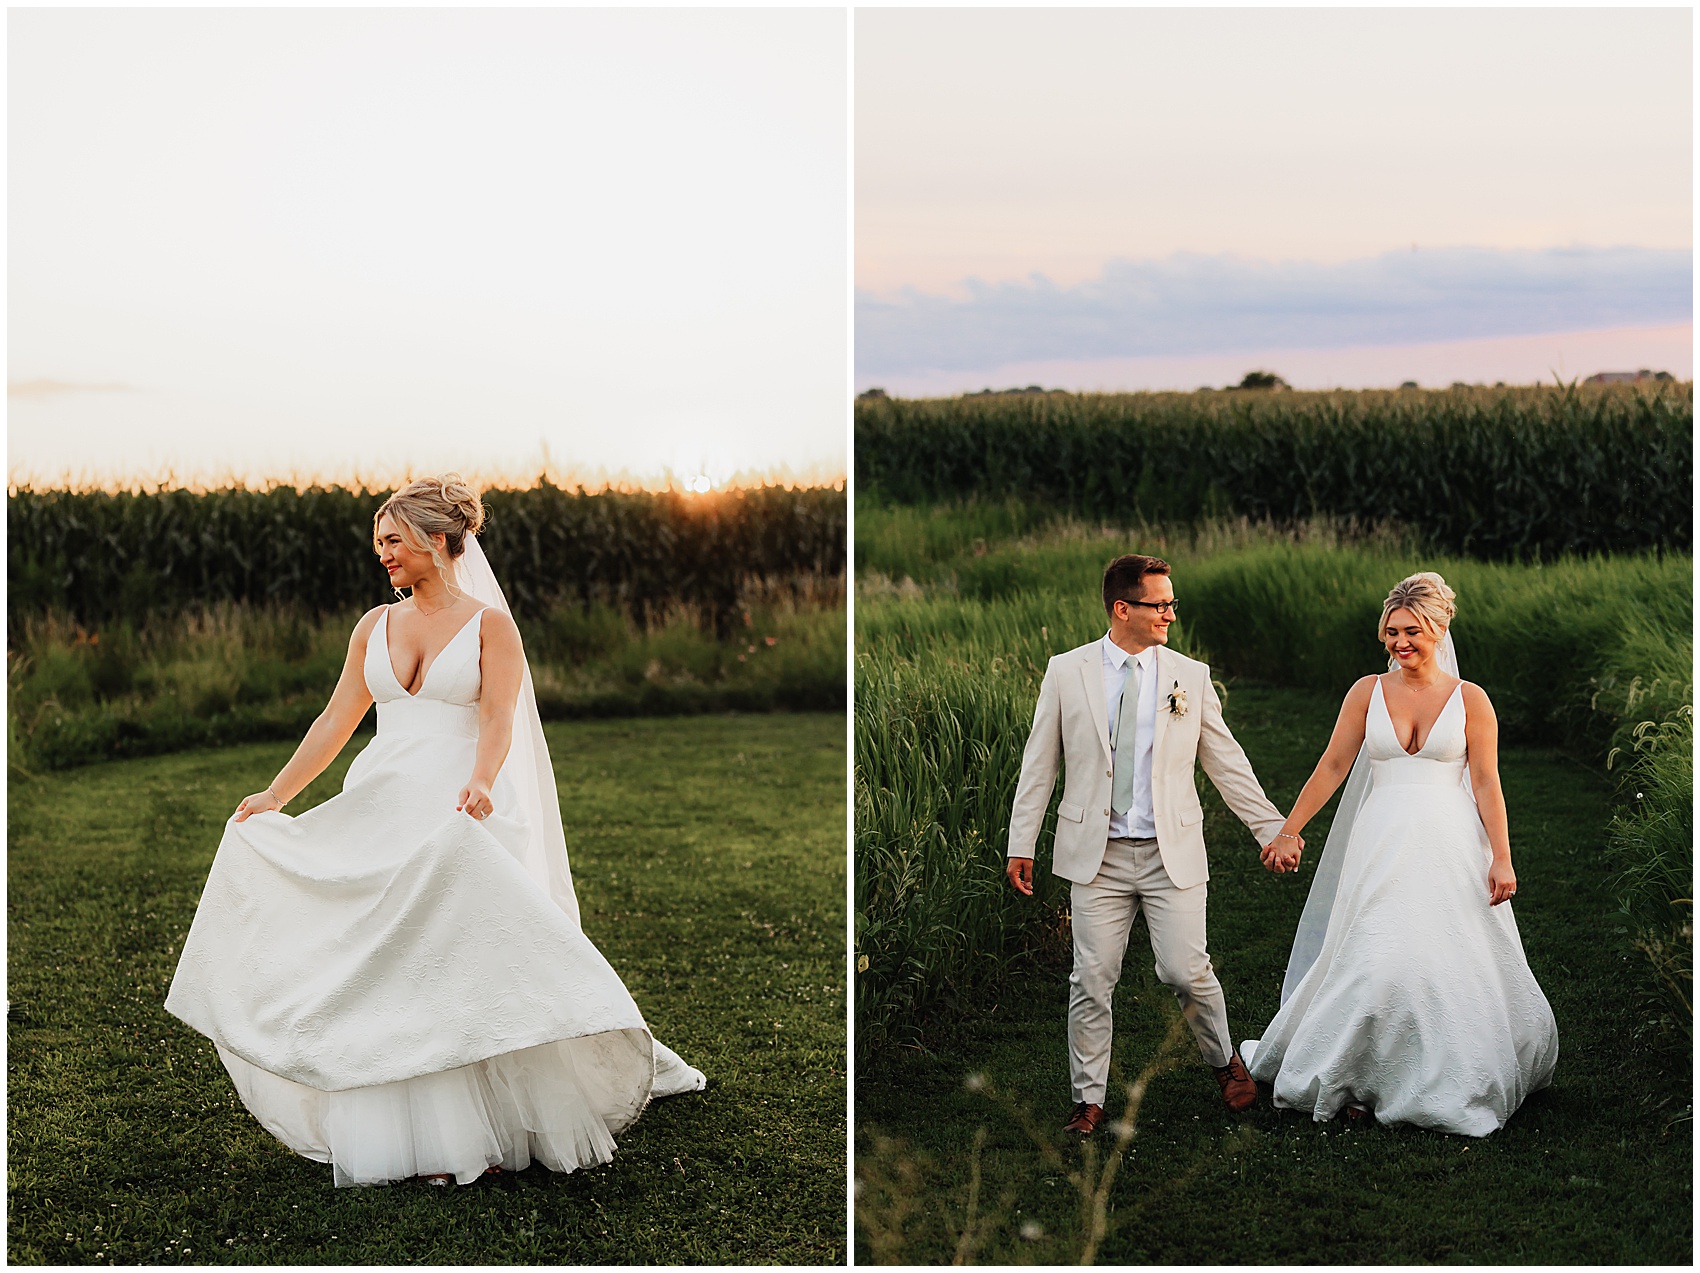 Newlyweds walk down a trail lined with tall grass and corn holding hands